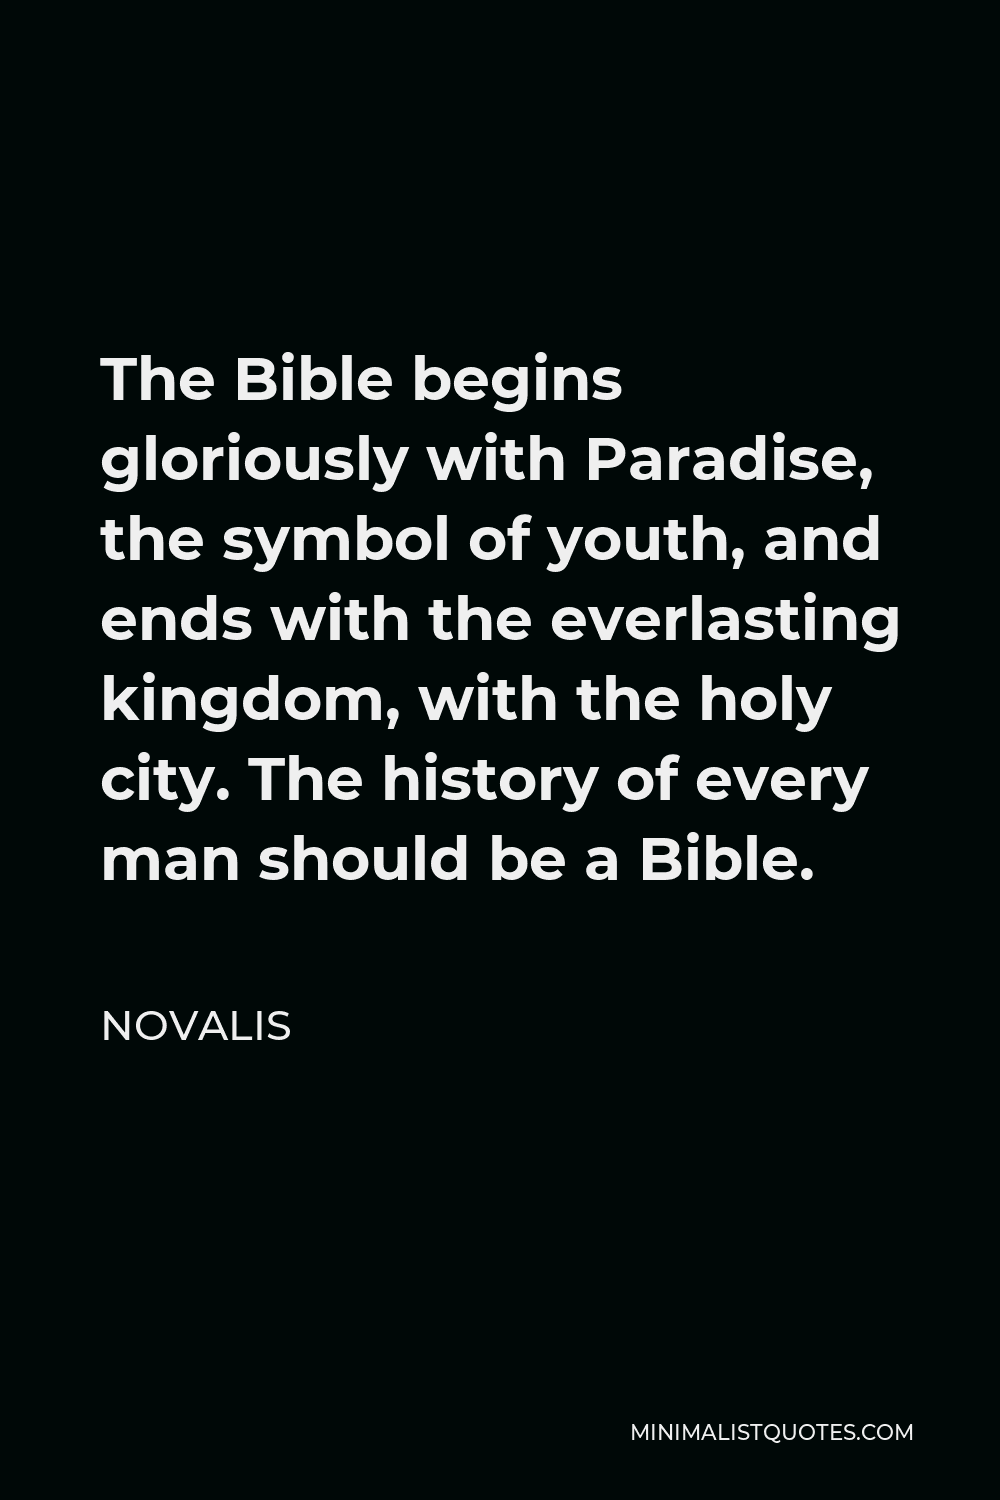 Novalis Quote - The Bible begins gloriously with Paradise, the symbol of youth, and ends with the everlasting kingdom, with the holy city. The history of every man should be a Bible.